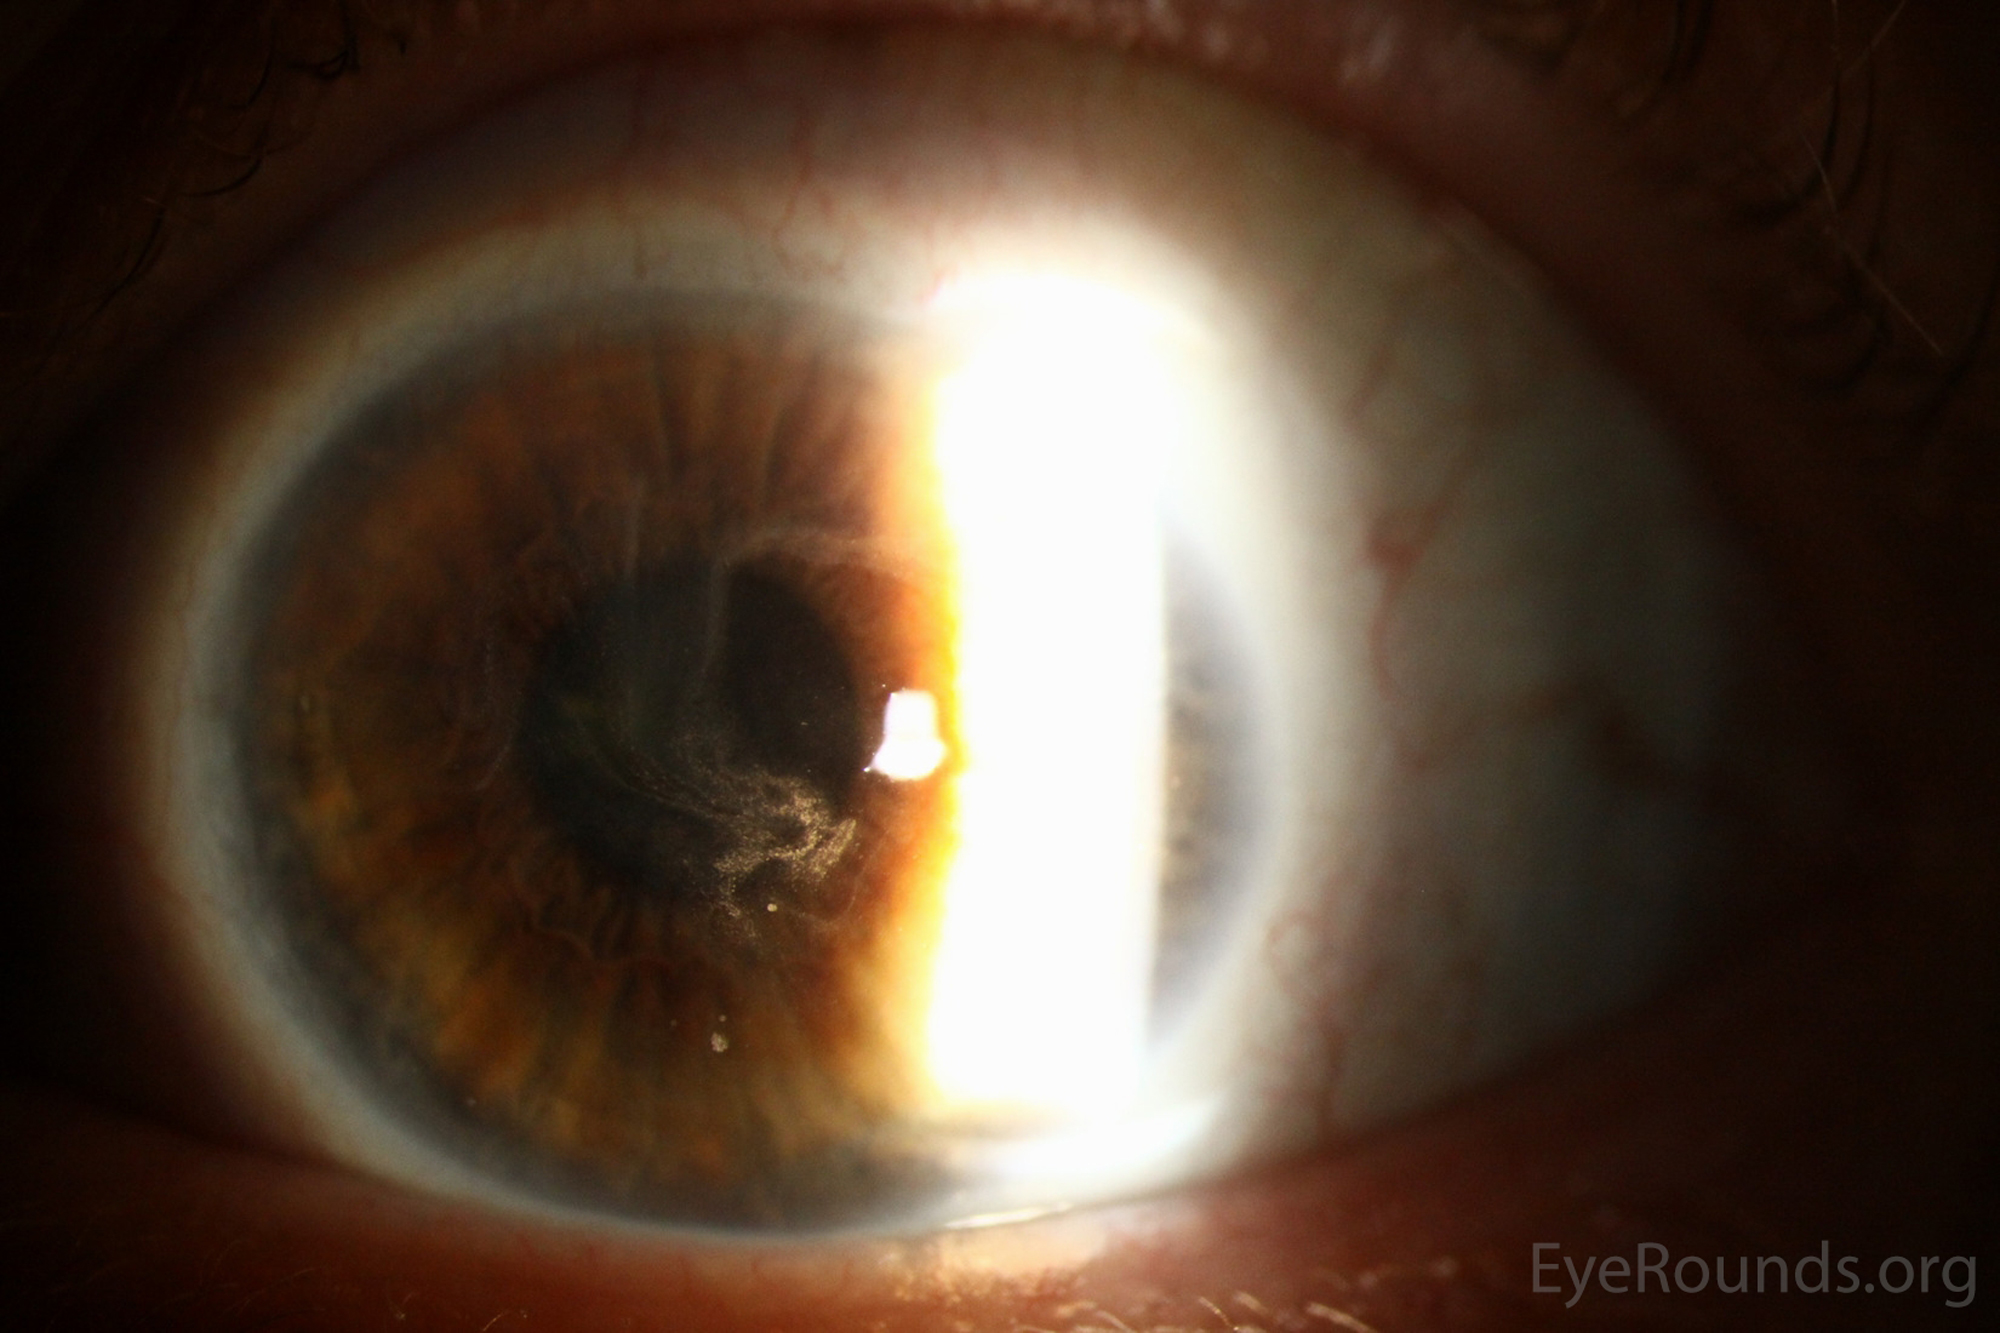 Slit Lamp -  disruption of the normal physiologic regenerative process and repopulation of corneal epithelium